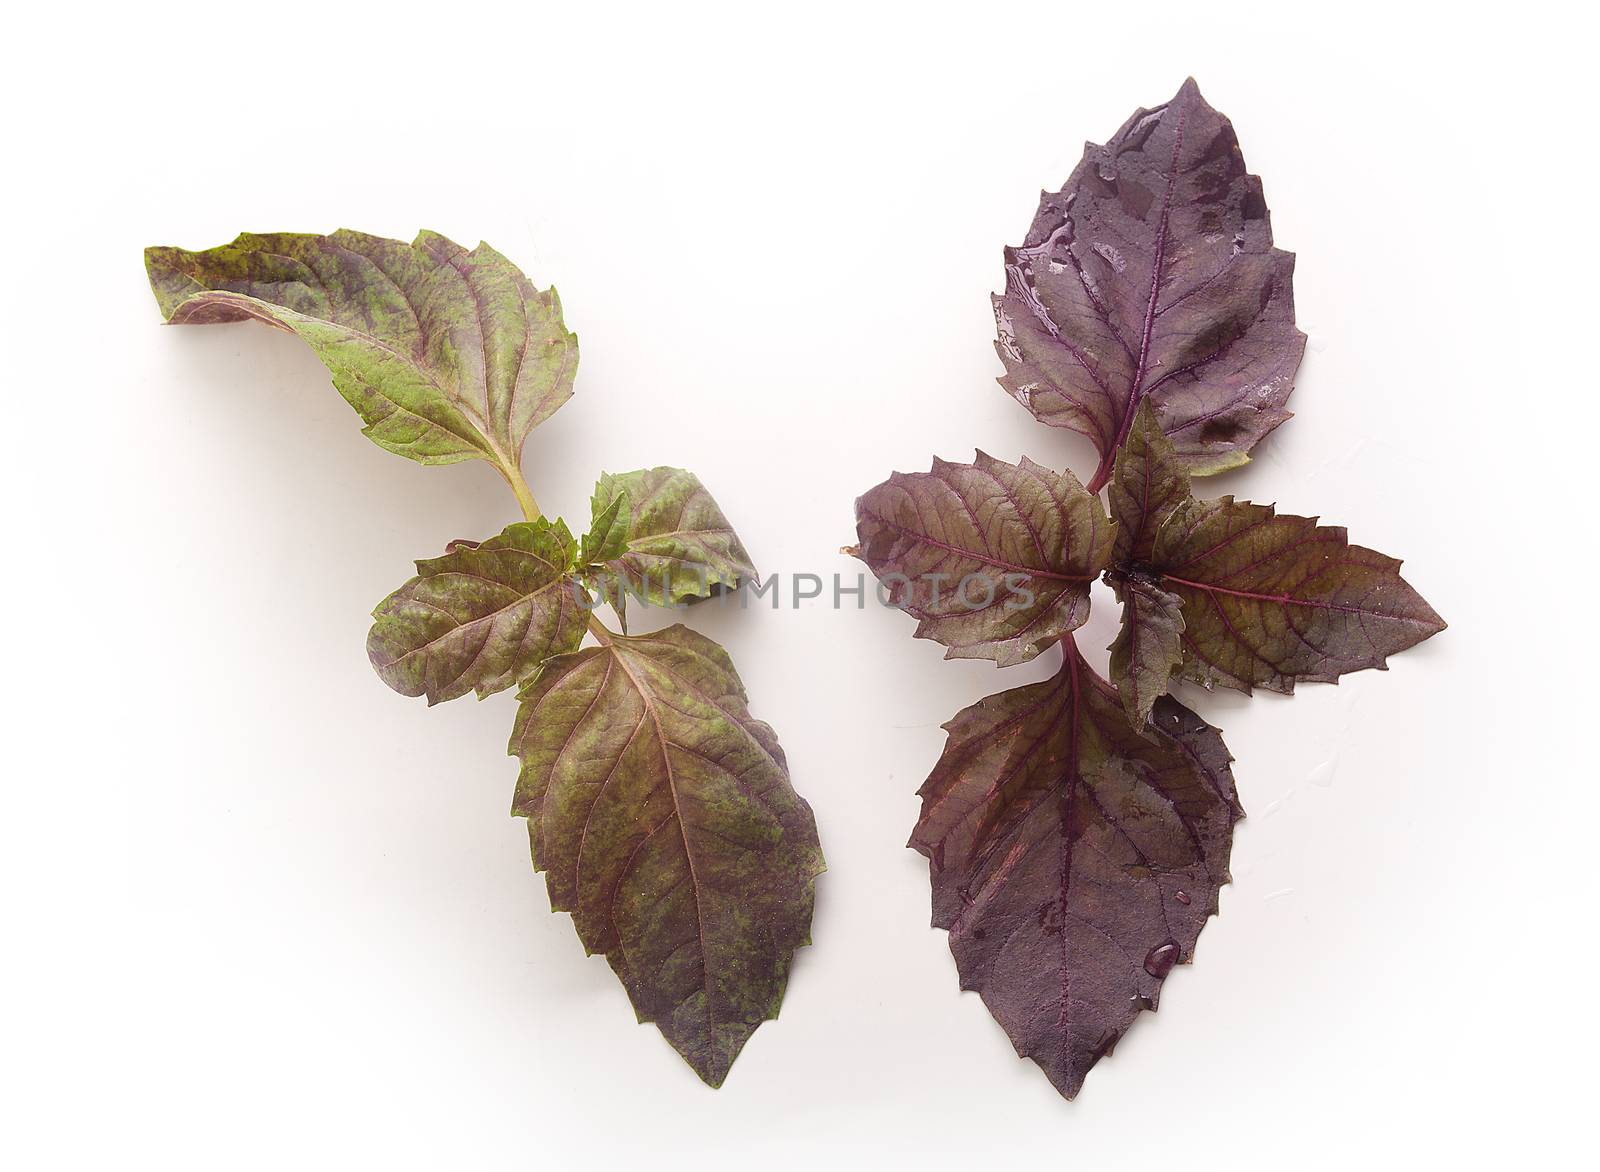 Two branch of purple basil by Angorius